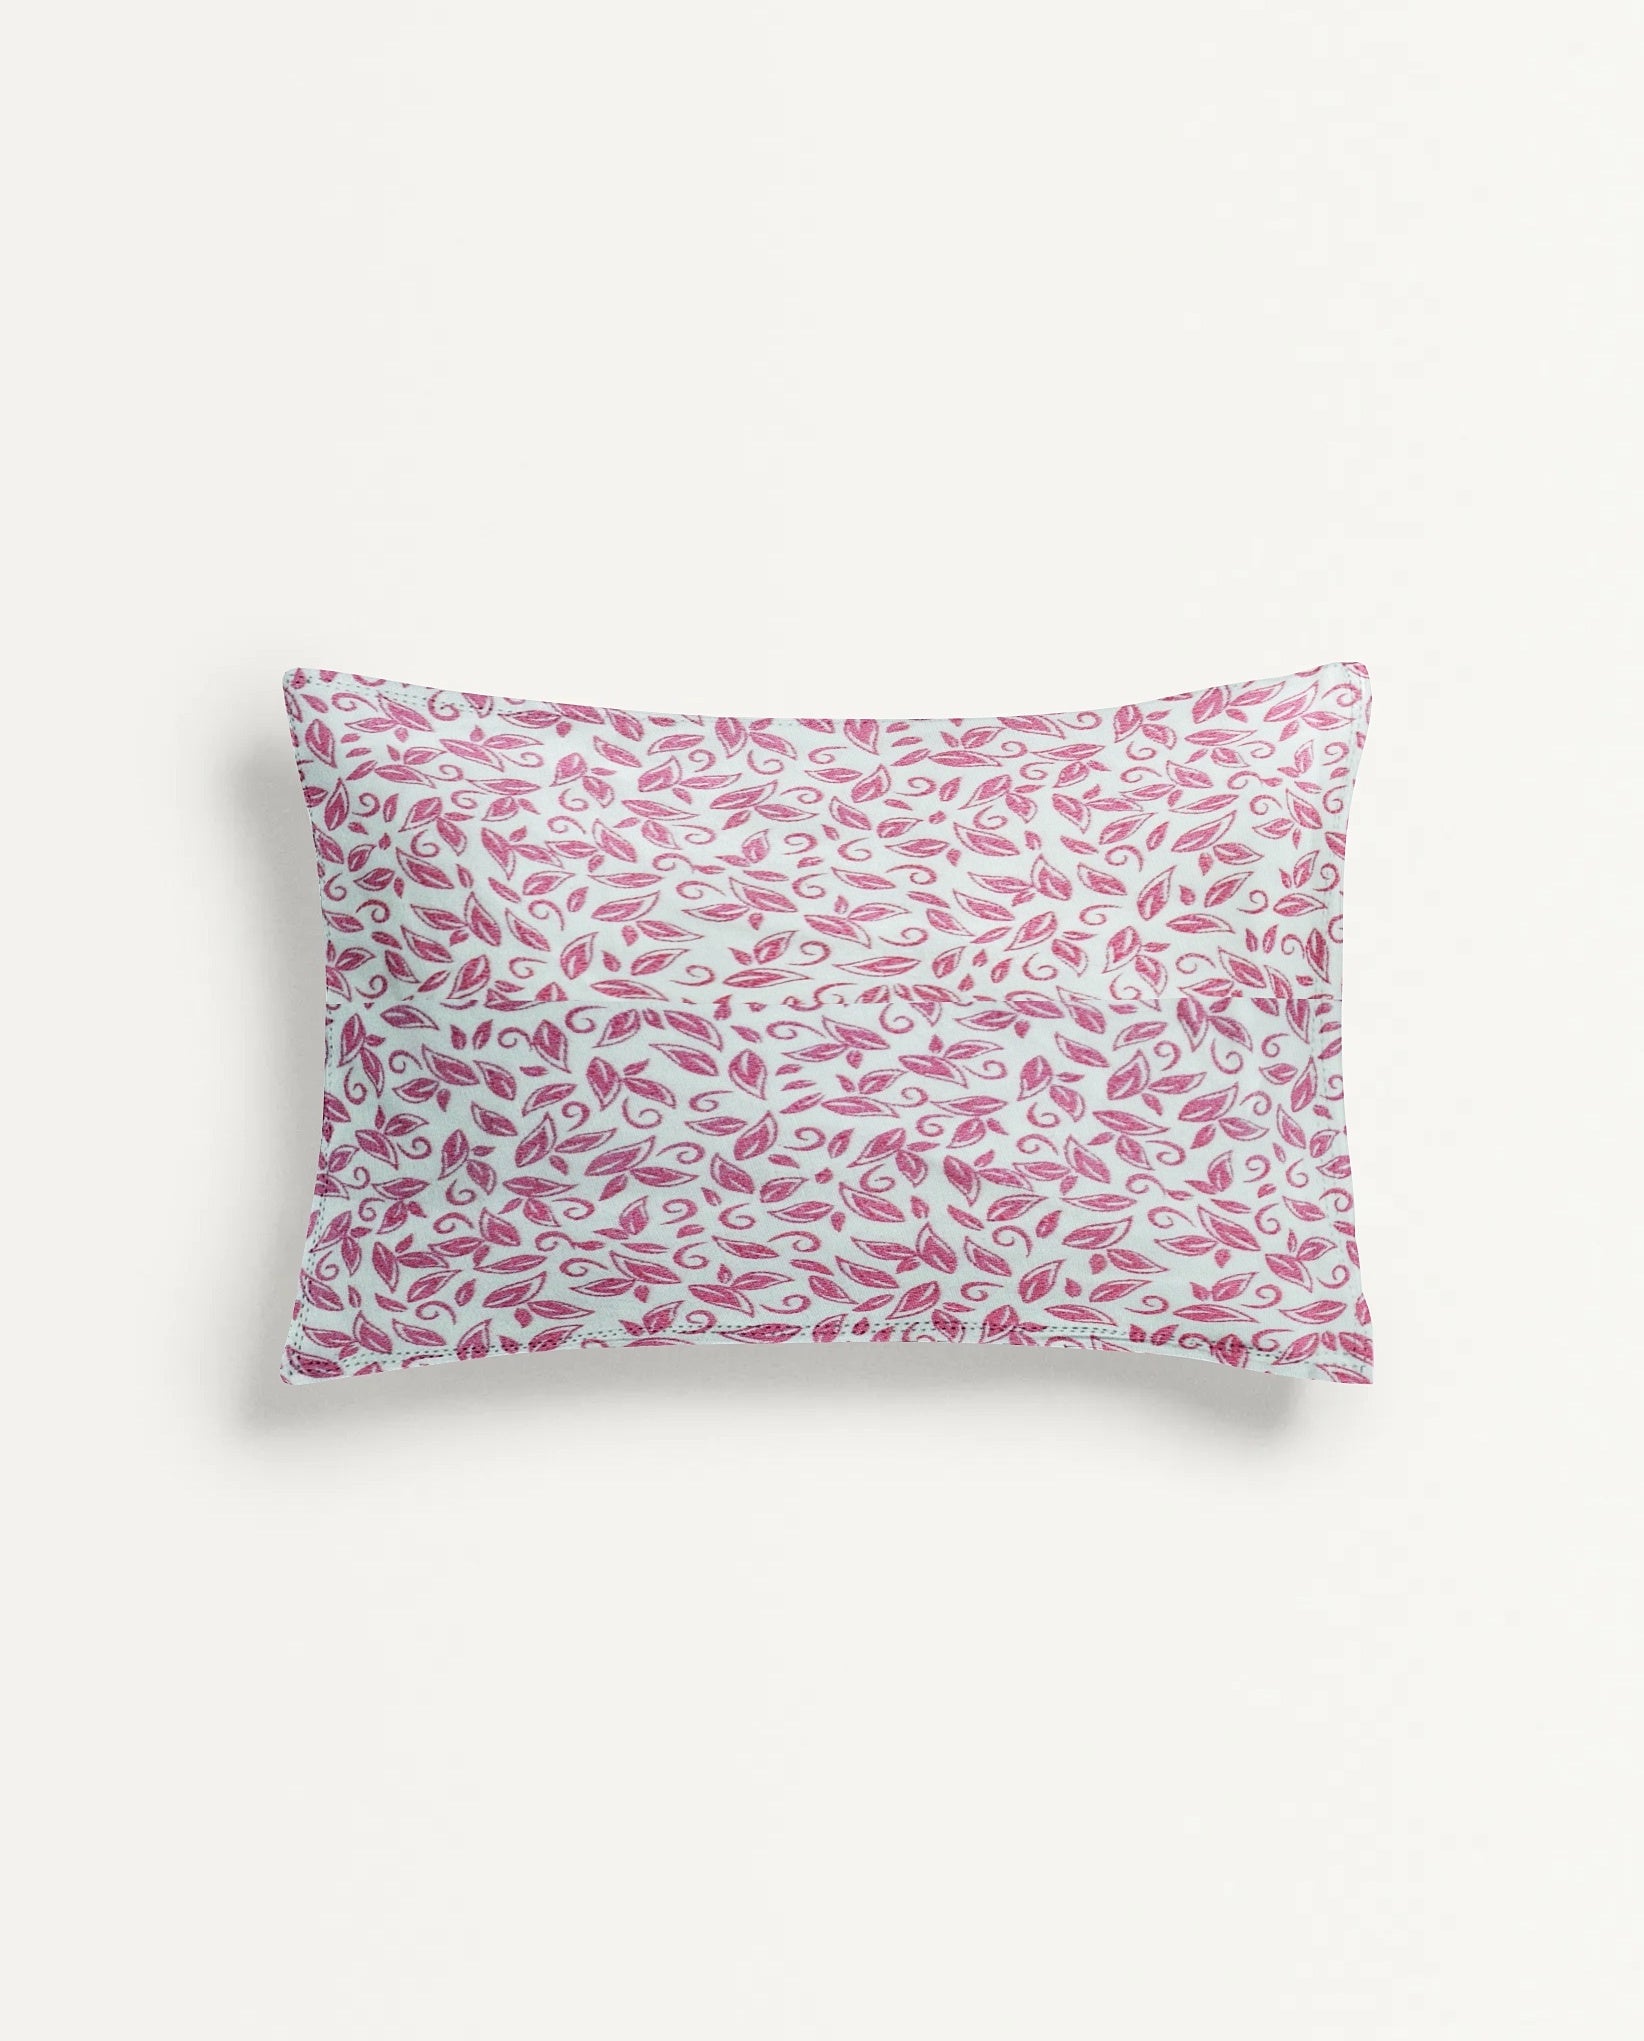 ‘Red Flower’ Organic Baby Pillow Cover